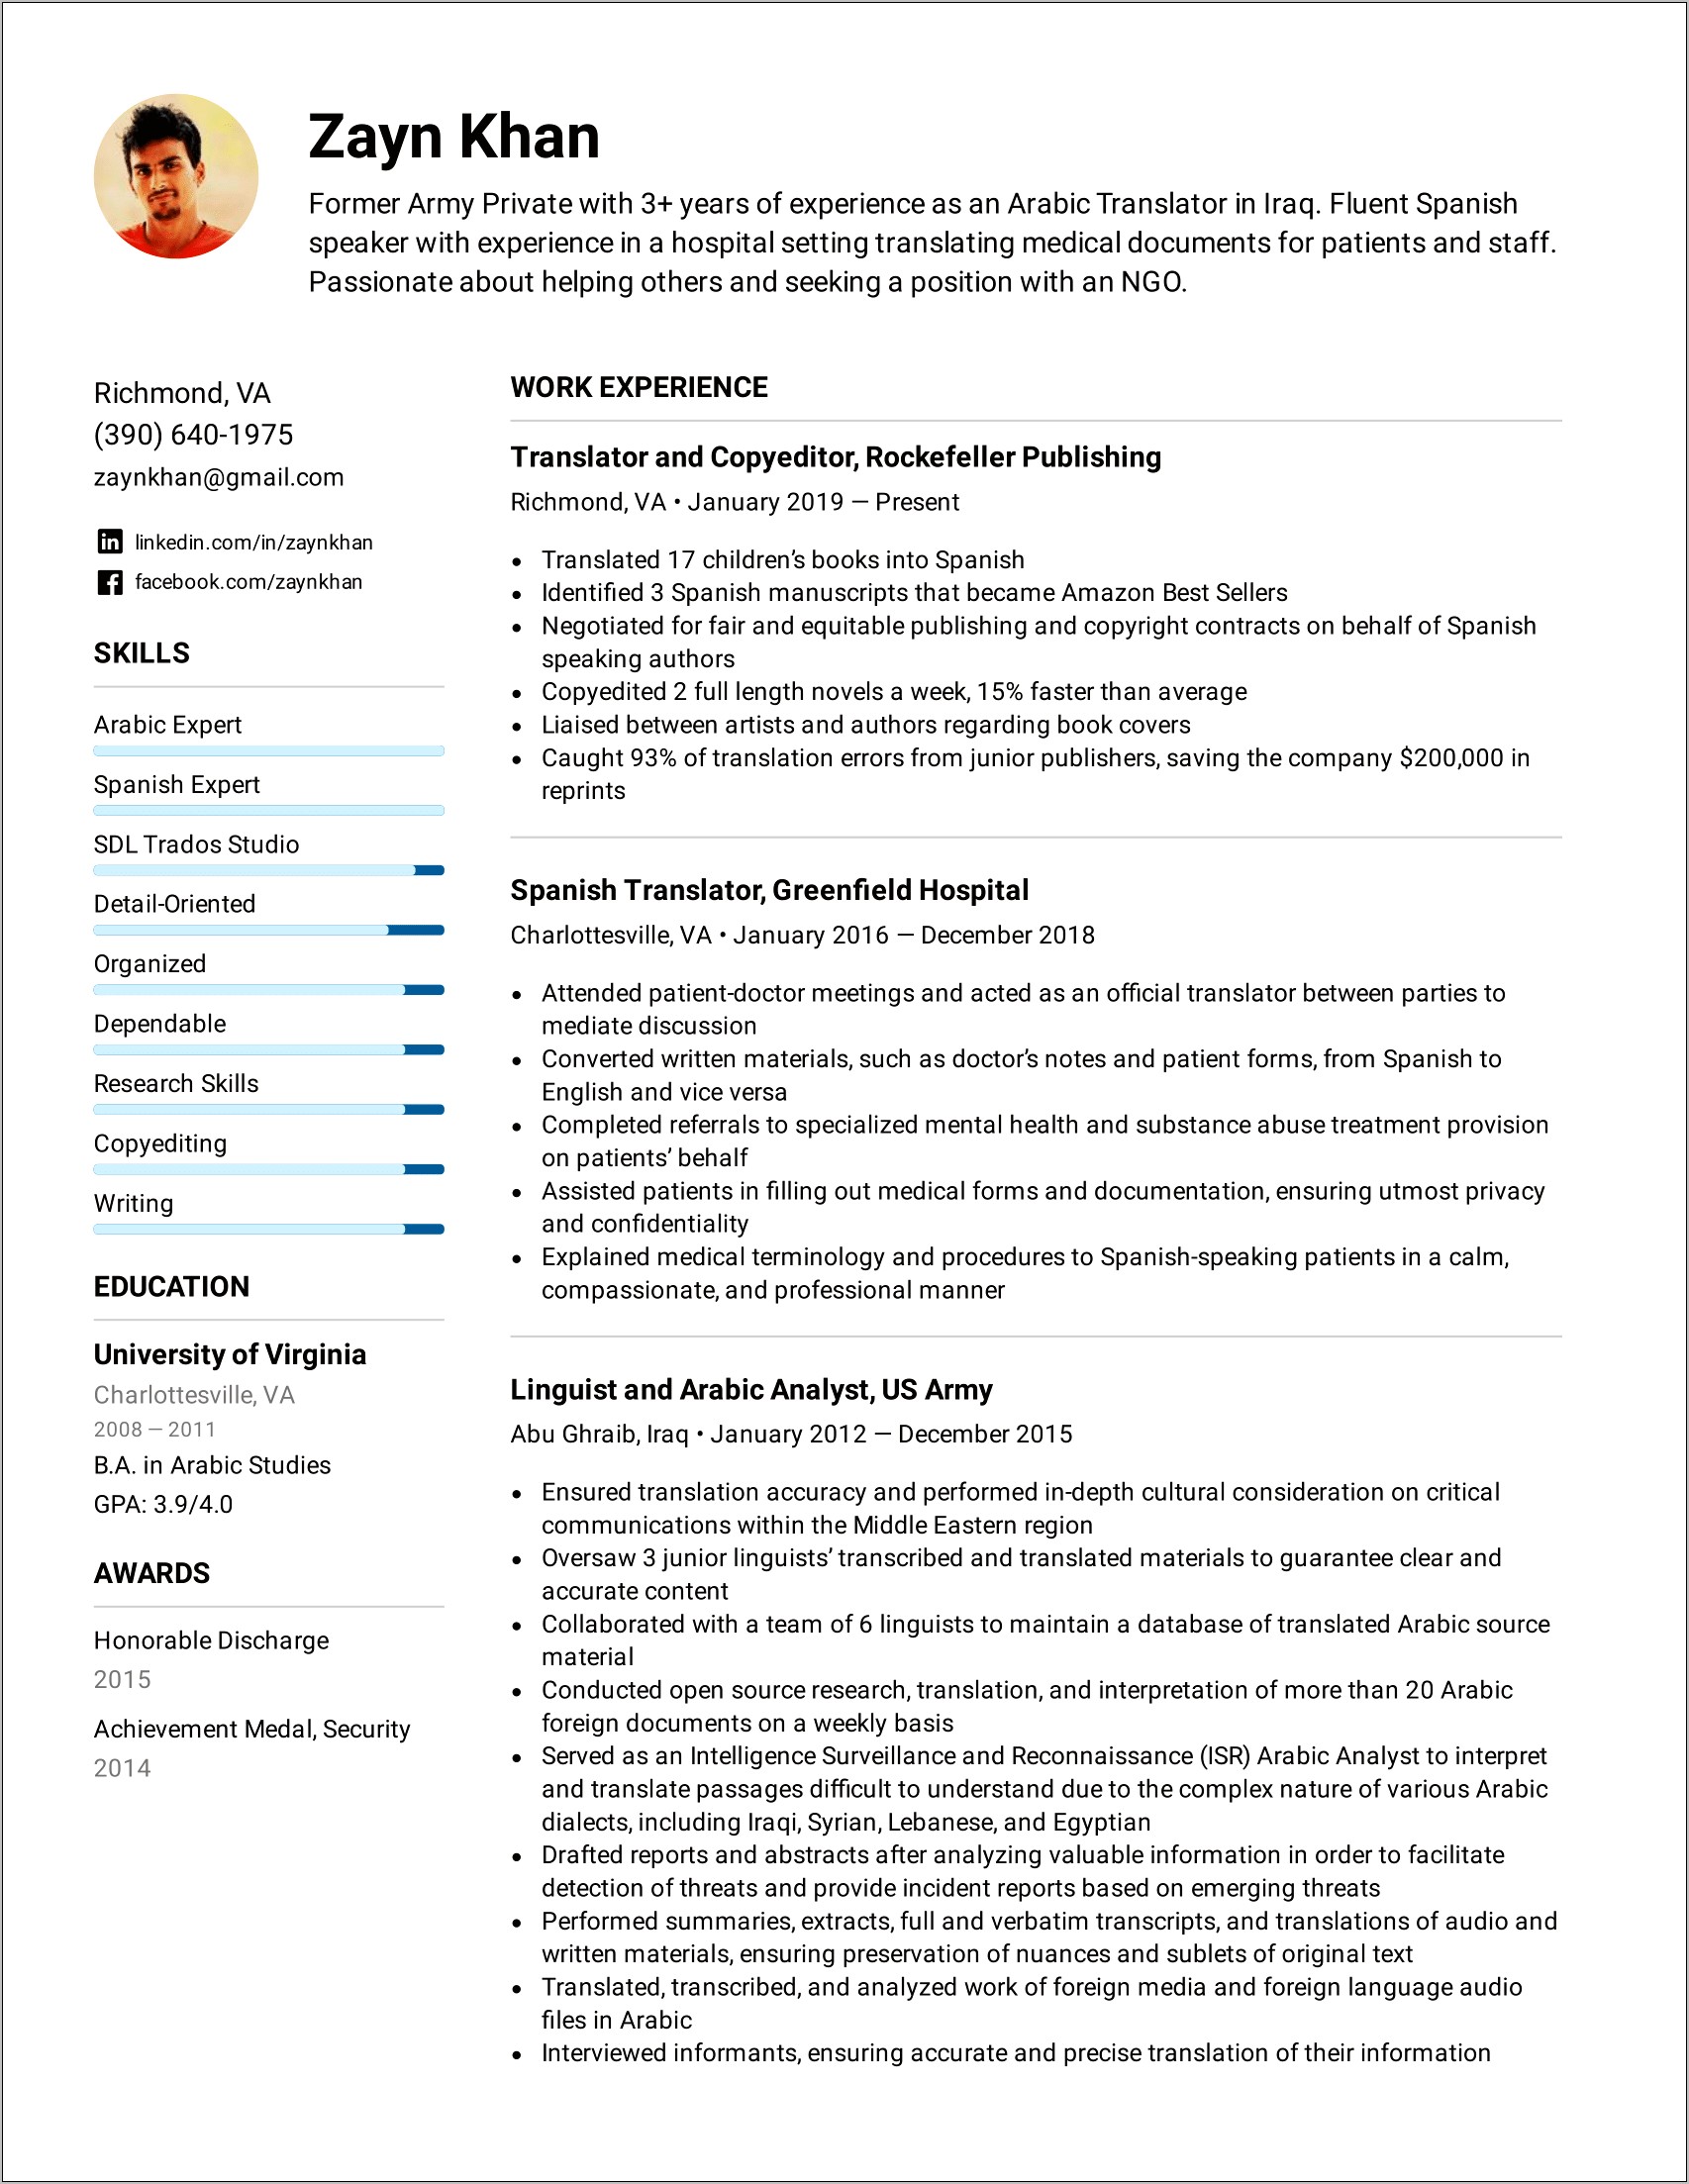 Resume Template Armed Security Military Experience